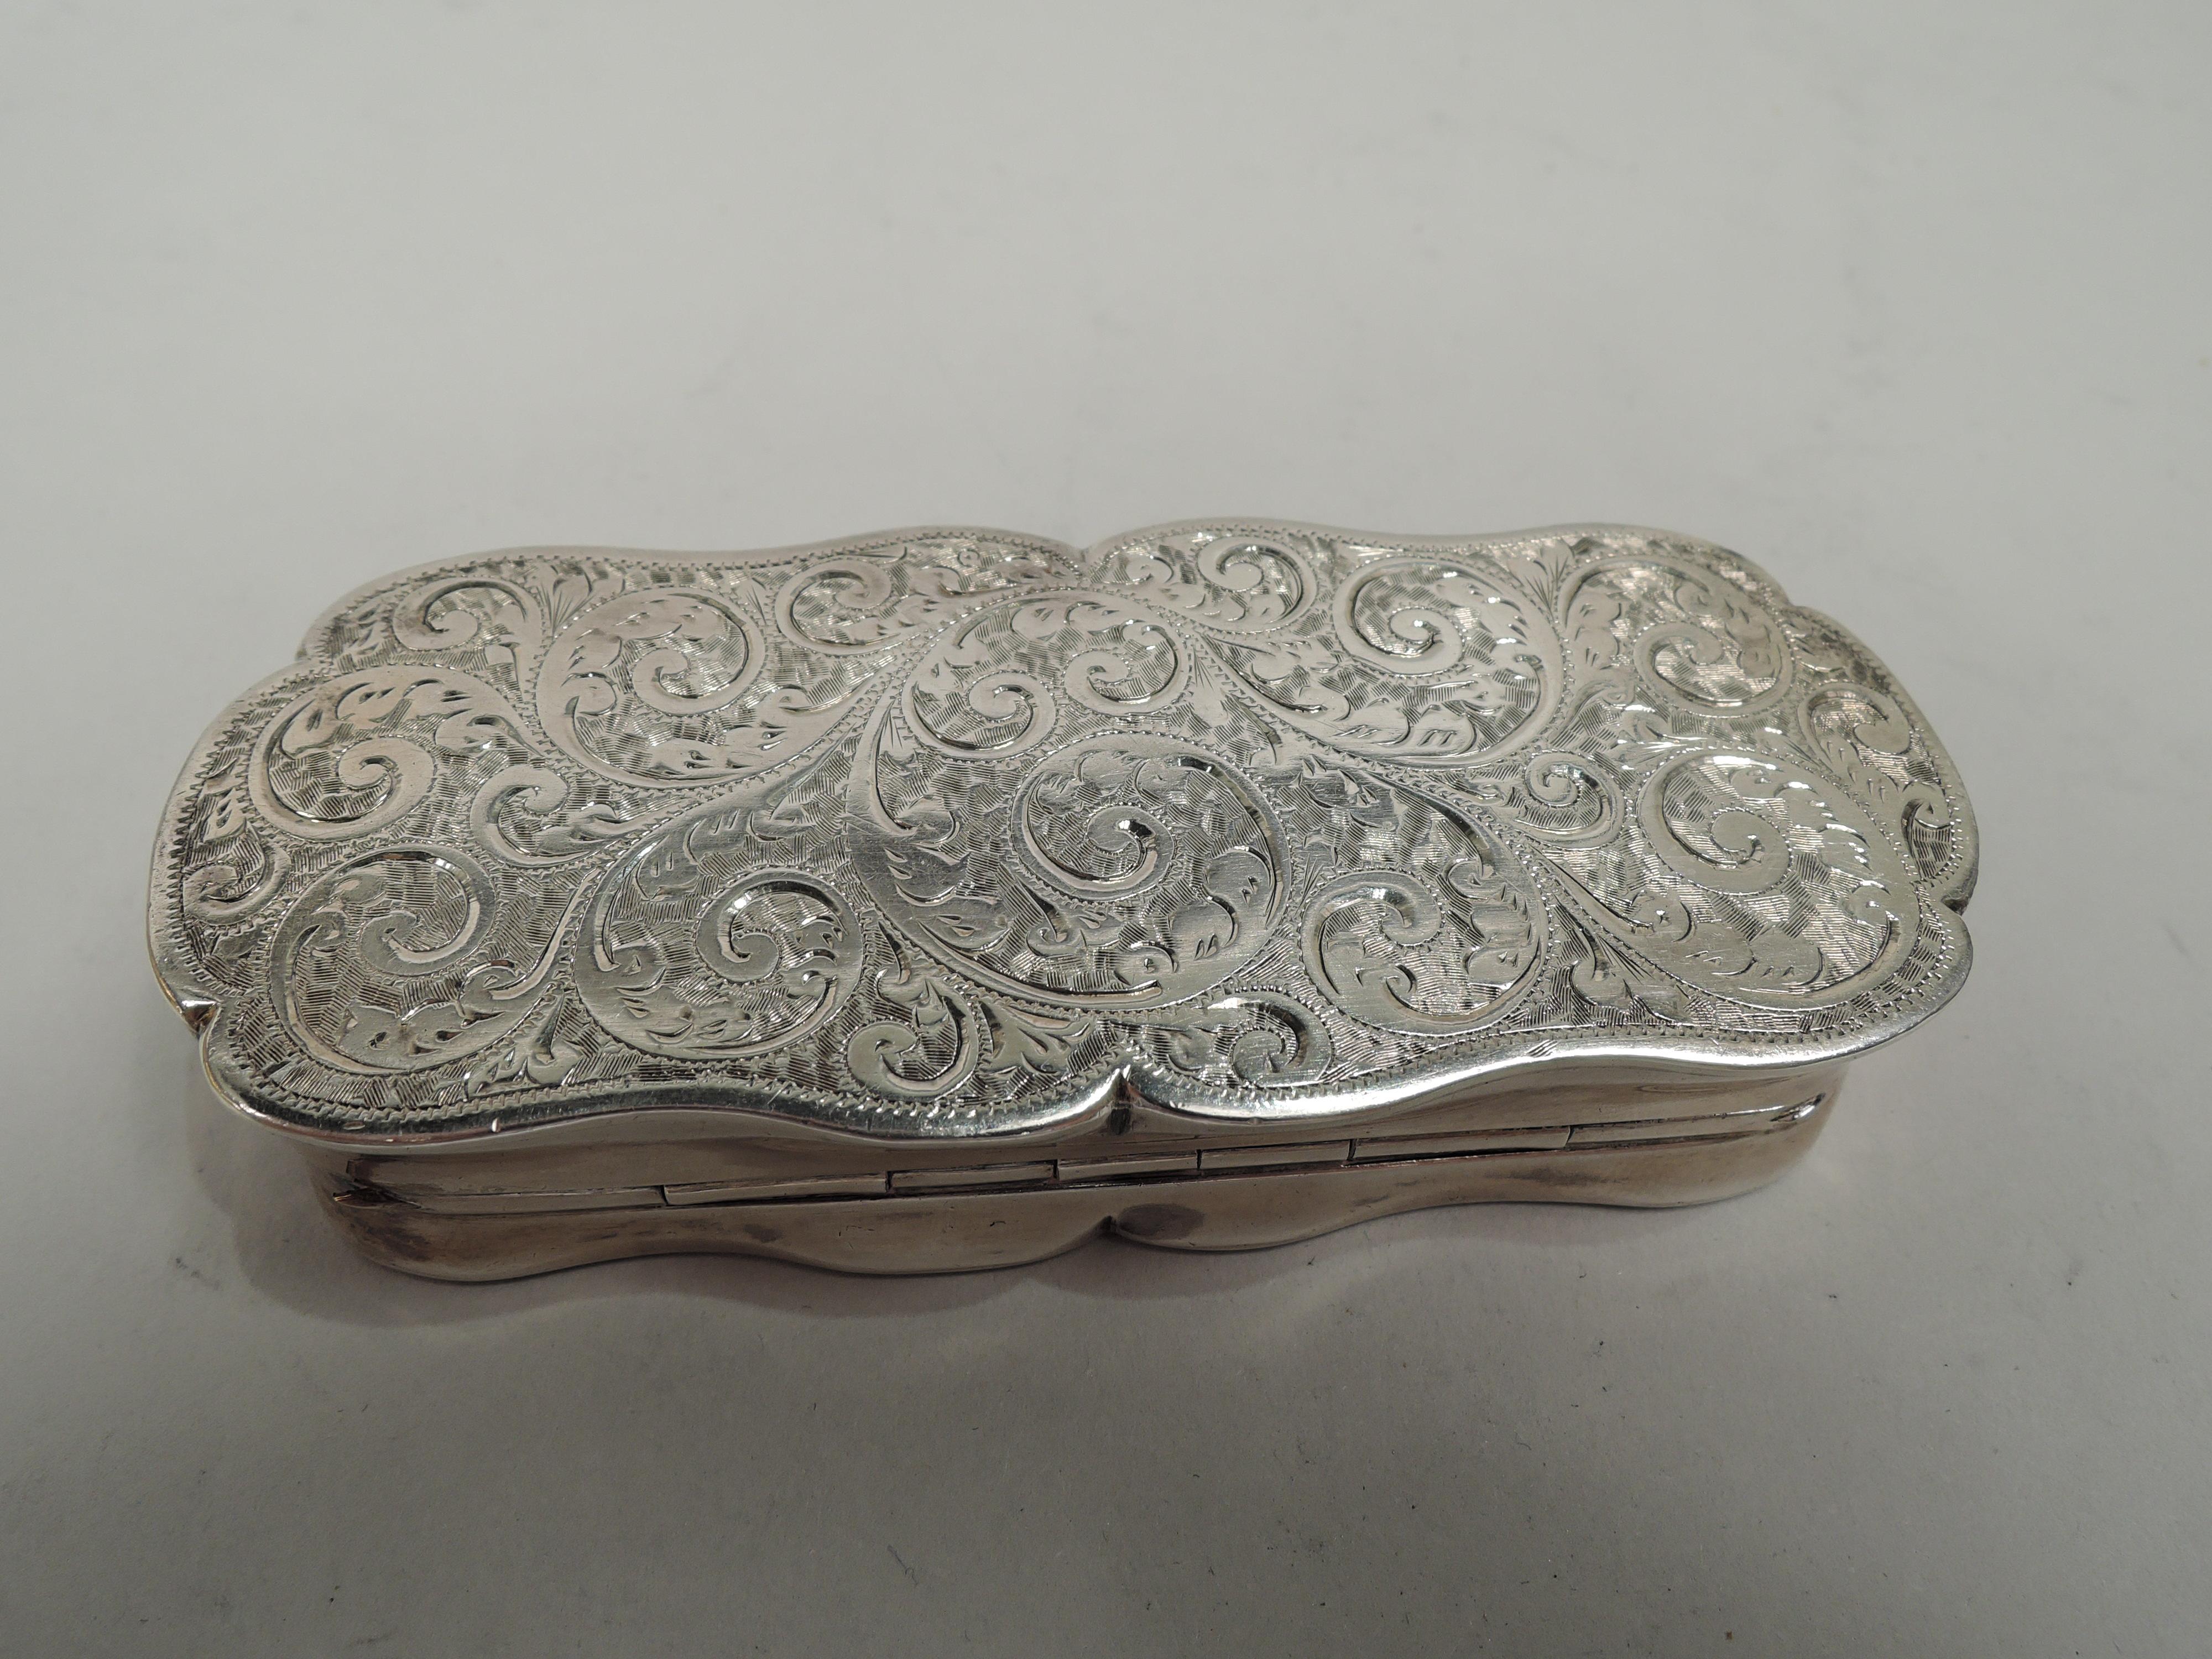 Victorian Classical sterling silver snuffbox. Made by Joseph Gloster, Ltd in Birmingham in 1896. Tubular with concave sides and scrolled rims. Cover hinged with straight tab. Leafing scrollwork on cover top and underside; cover top has armorial